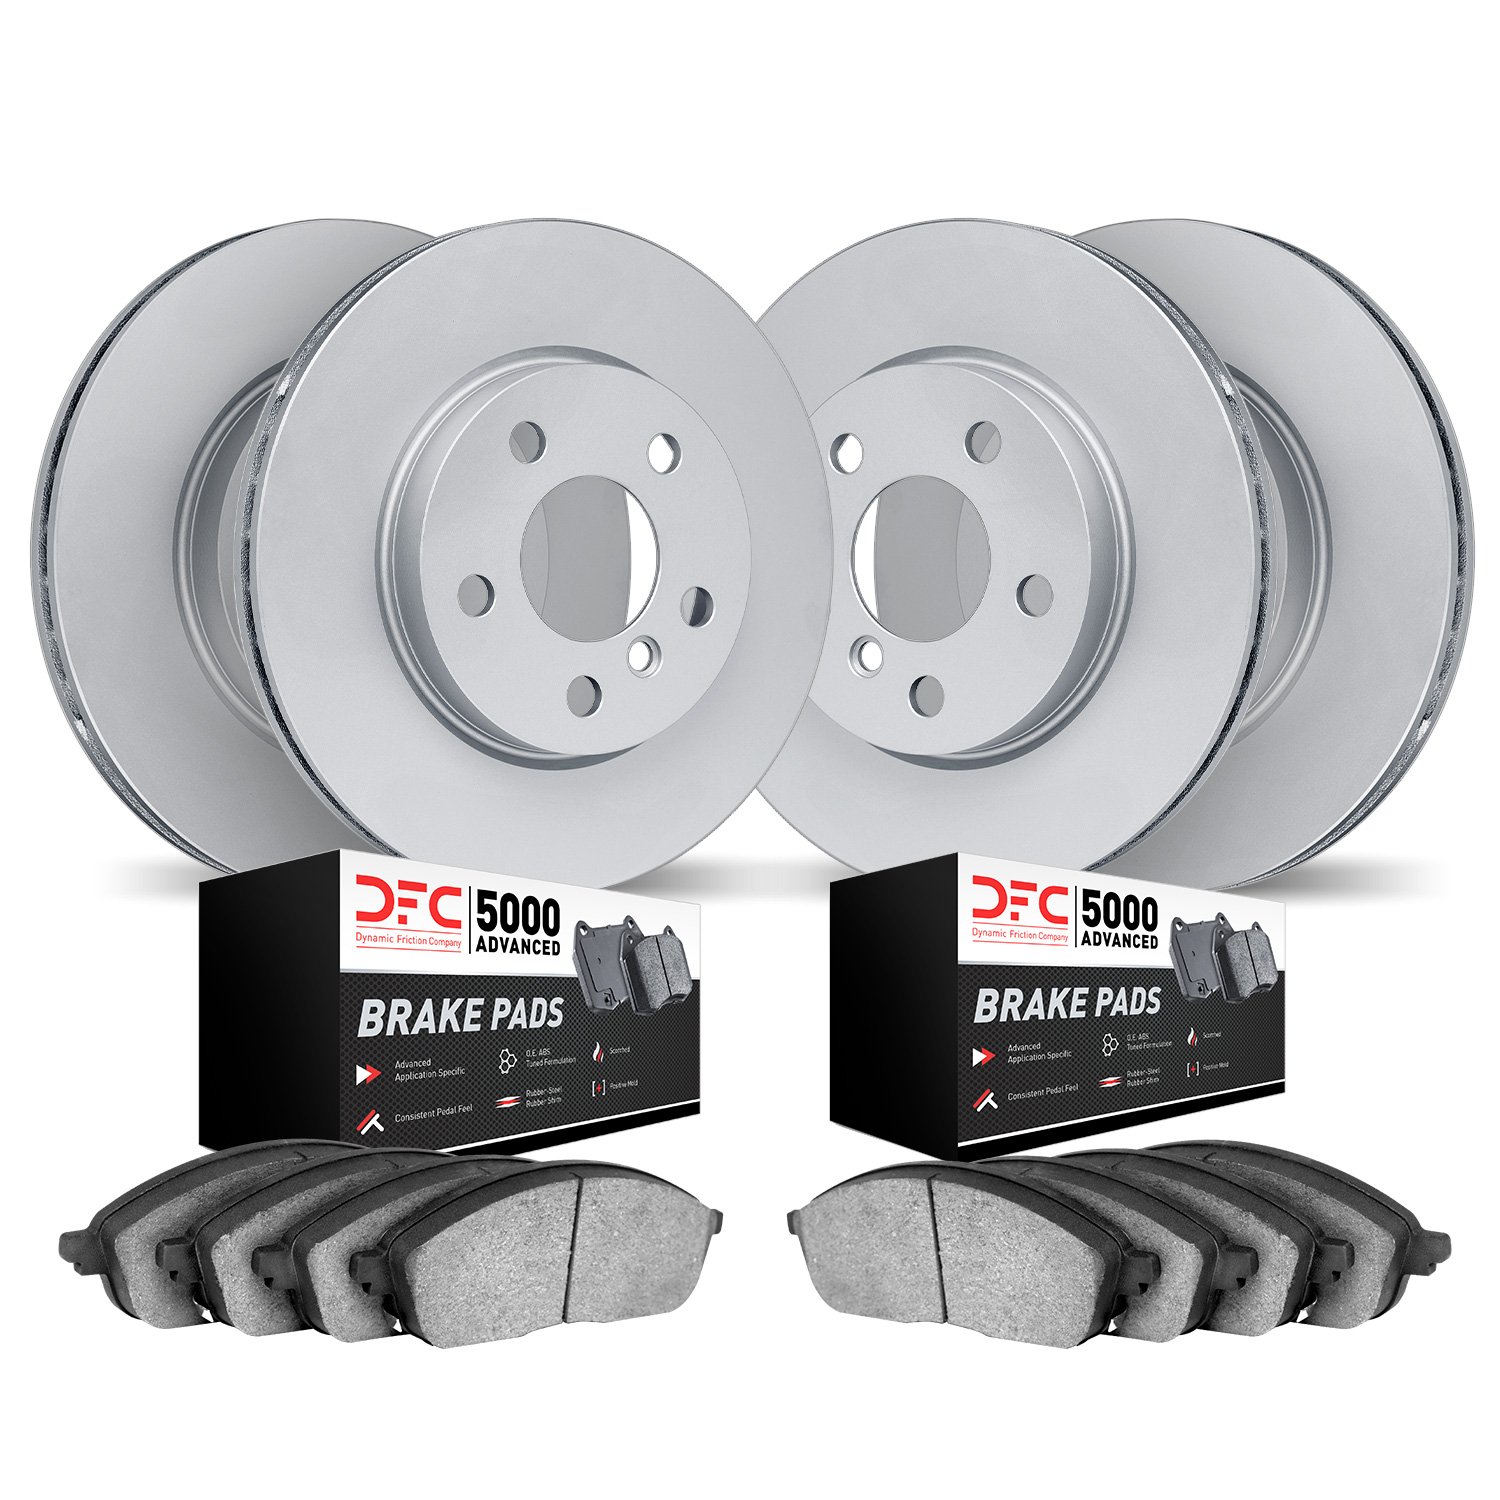 9504-31166 GEOMET Brake Rotors w/5000 Advanced Brake Pads Kit, Fits Select Lexus/Toyota/Scion, Position: Front and Rear